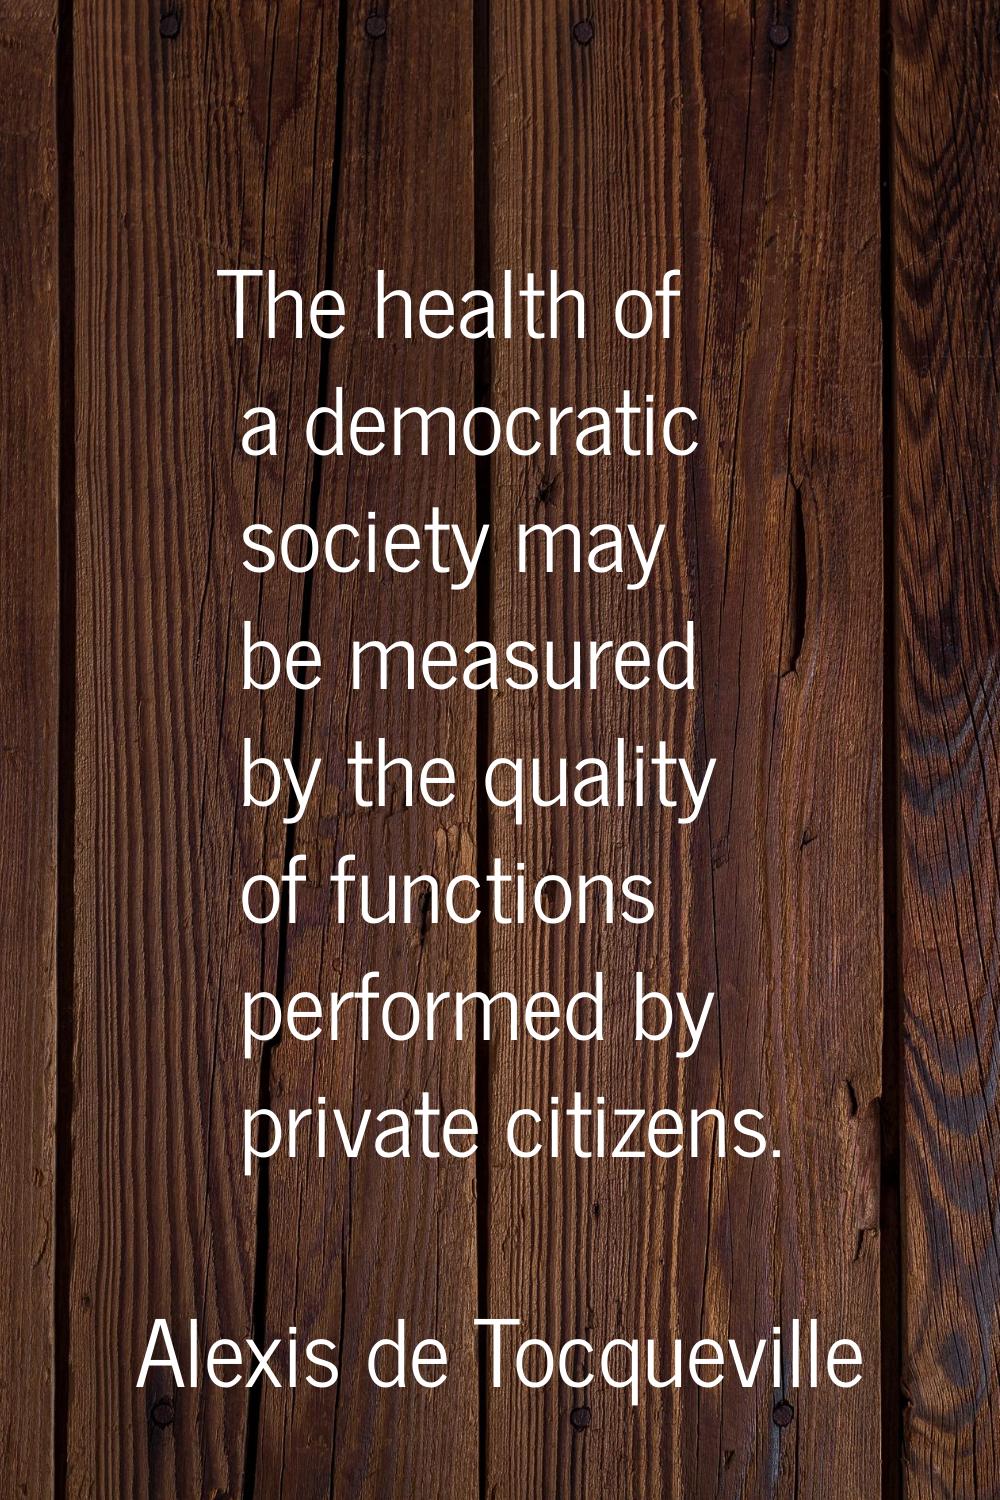 The health of a democratic society may be measured by the quality of functions performed by private